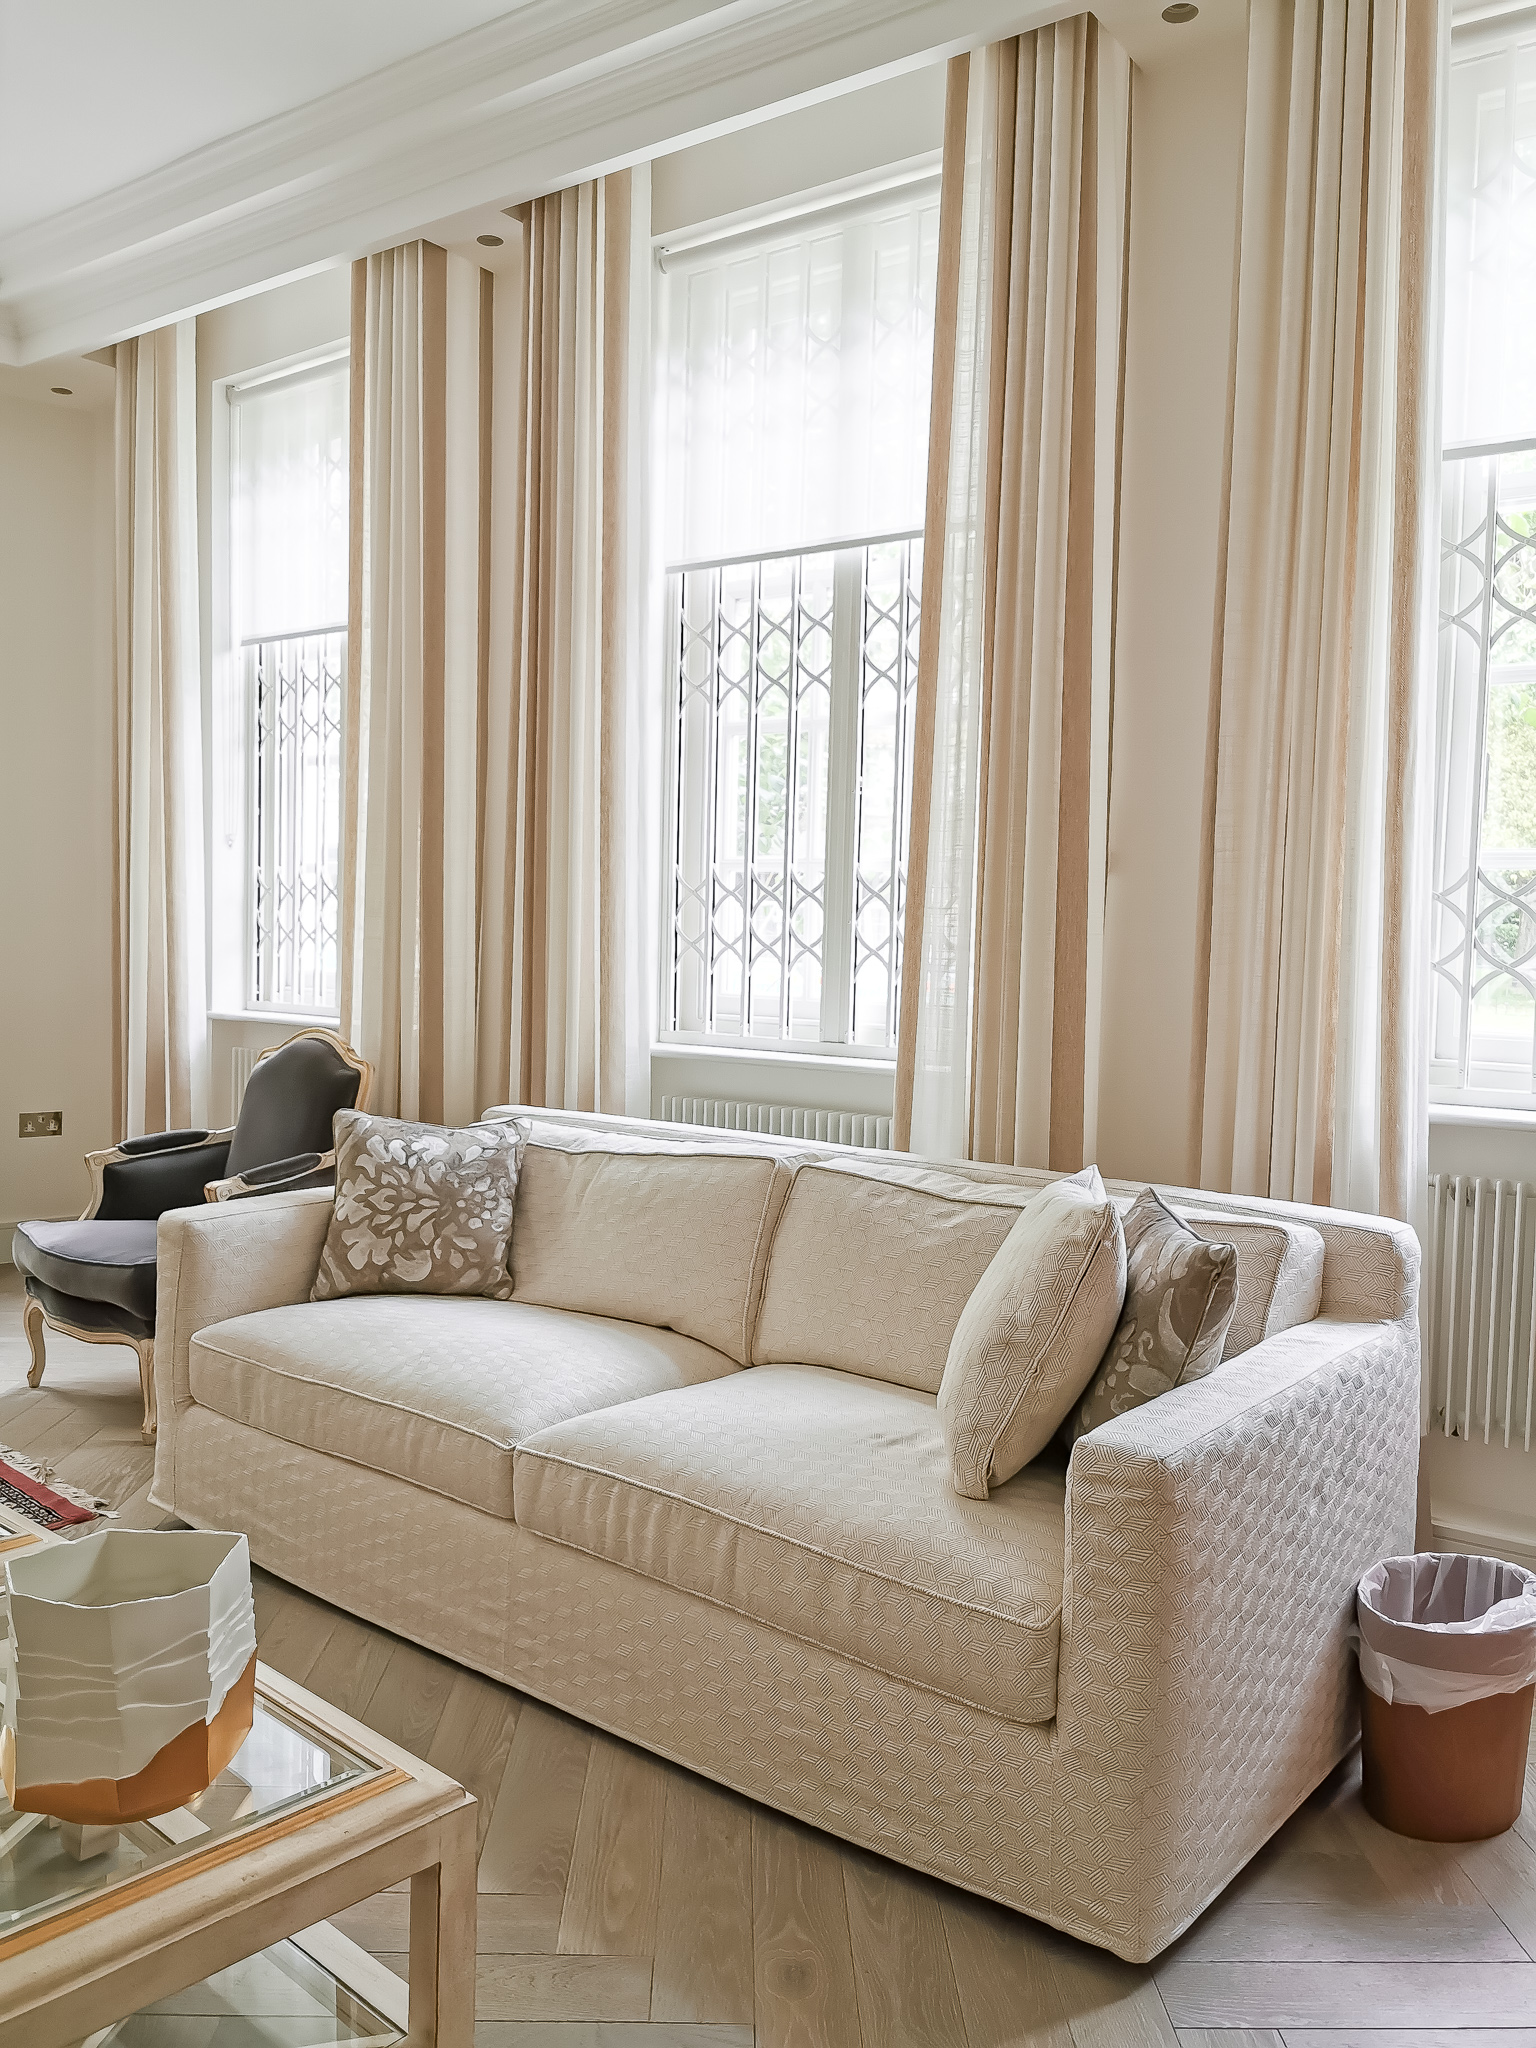 Re-covered sofa and sheer living room curtains